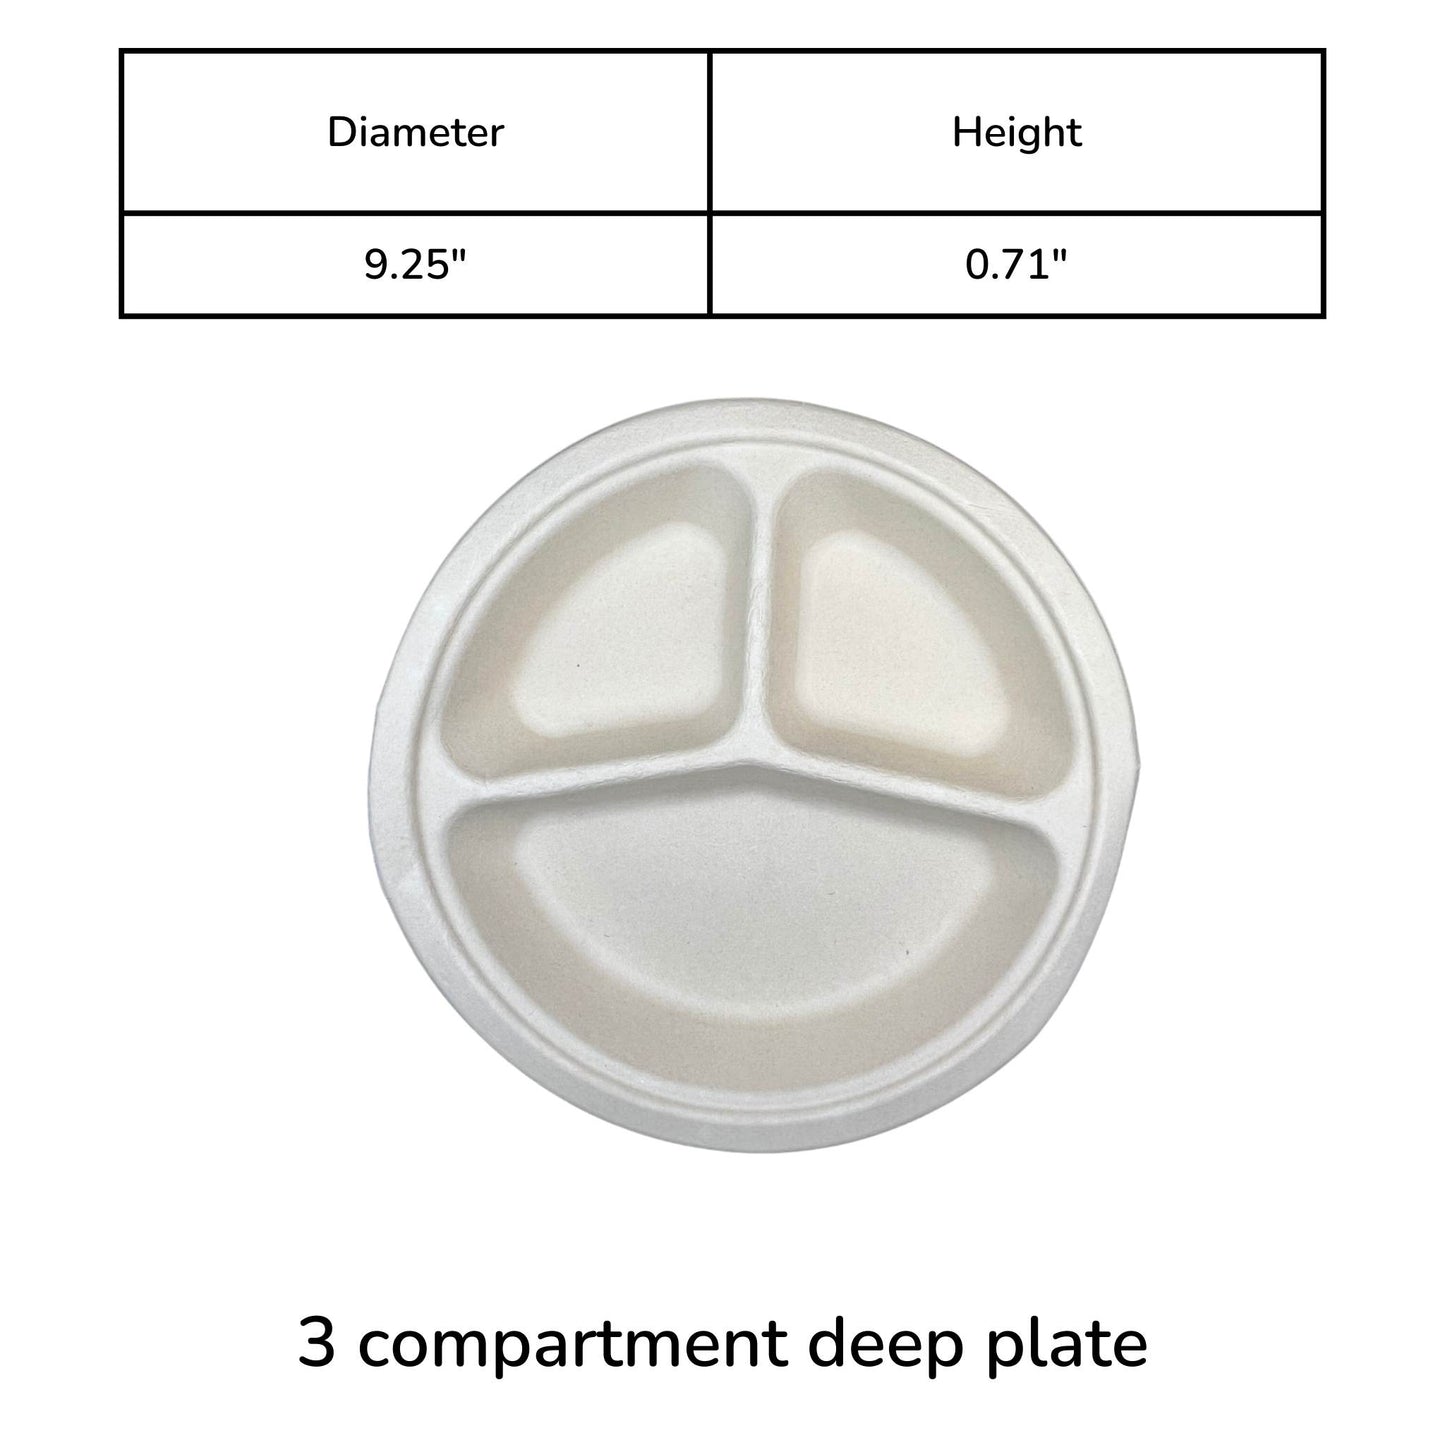 Disposable 3 compartment shallow plate